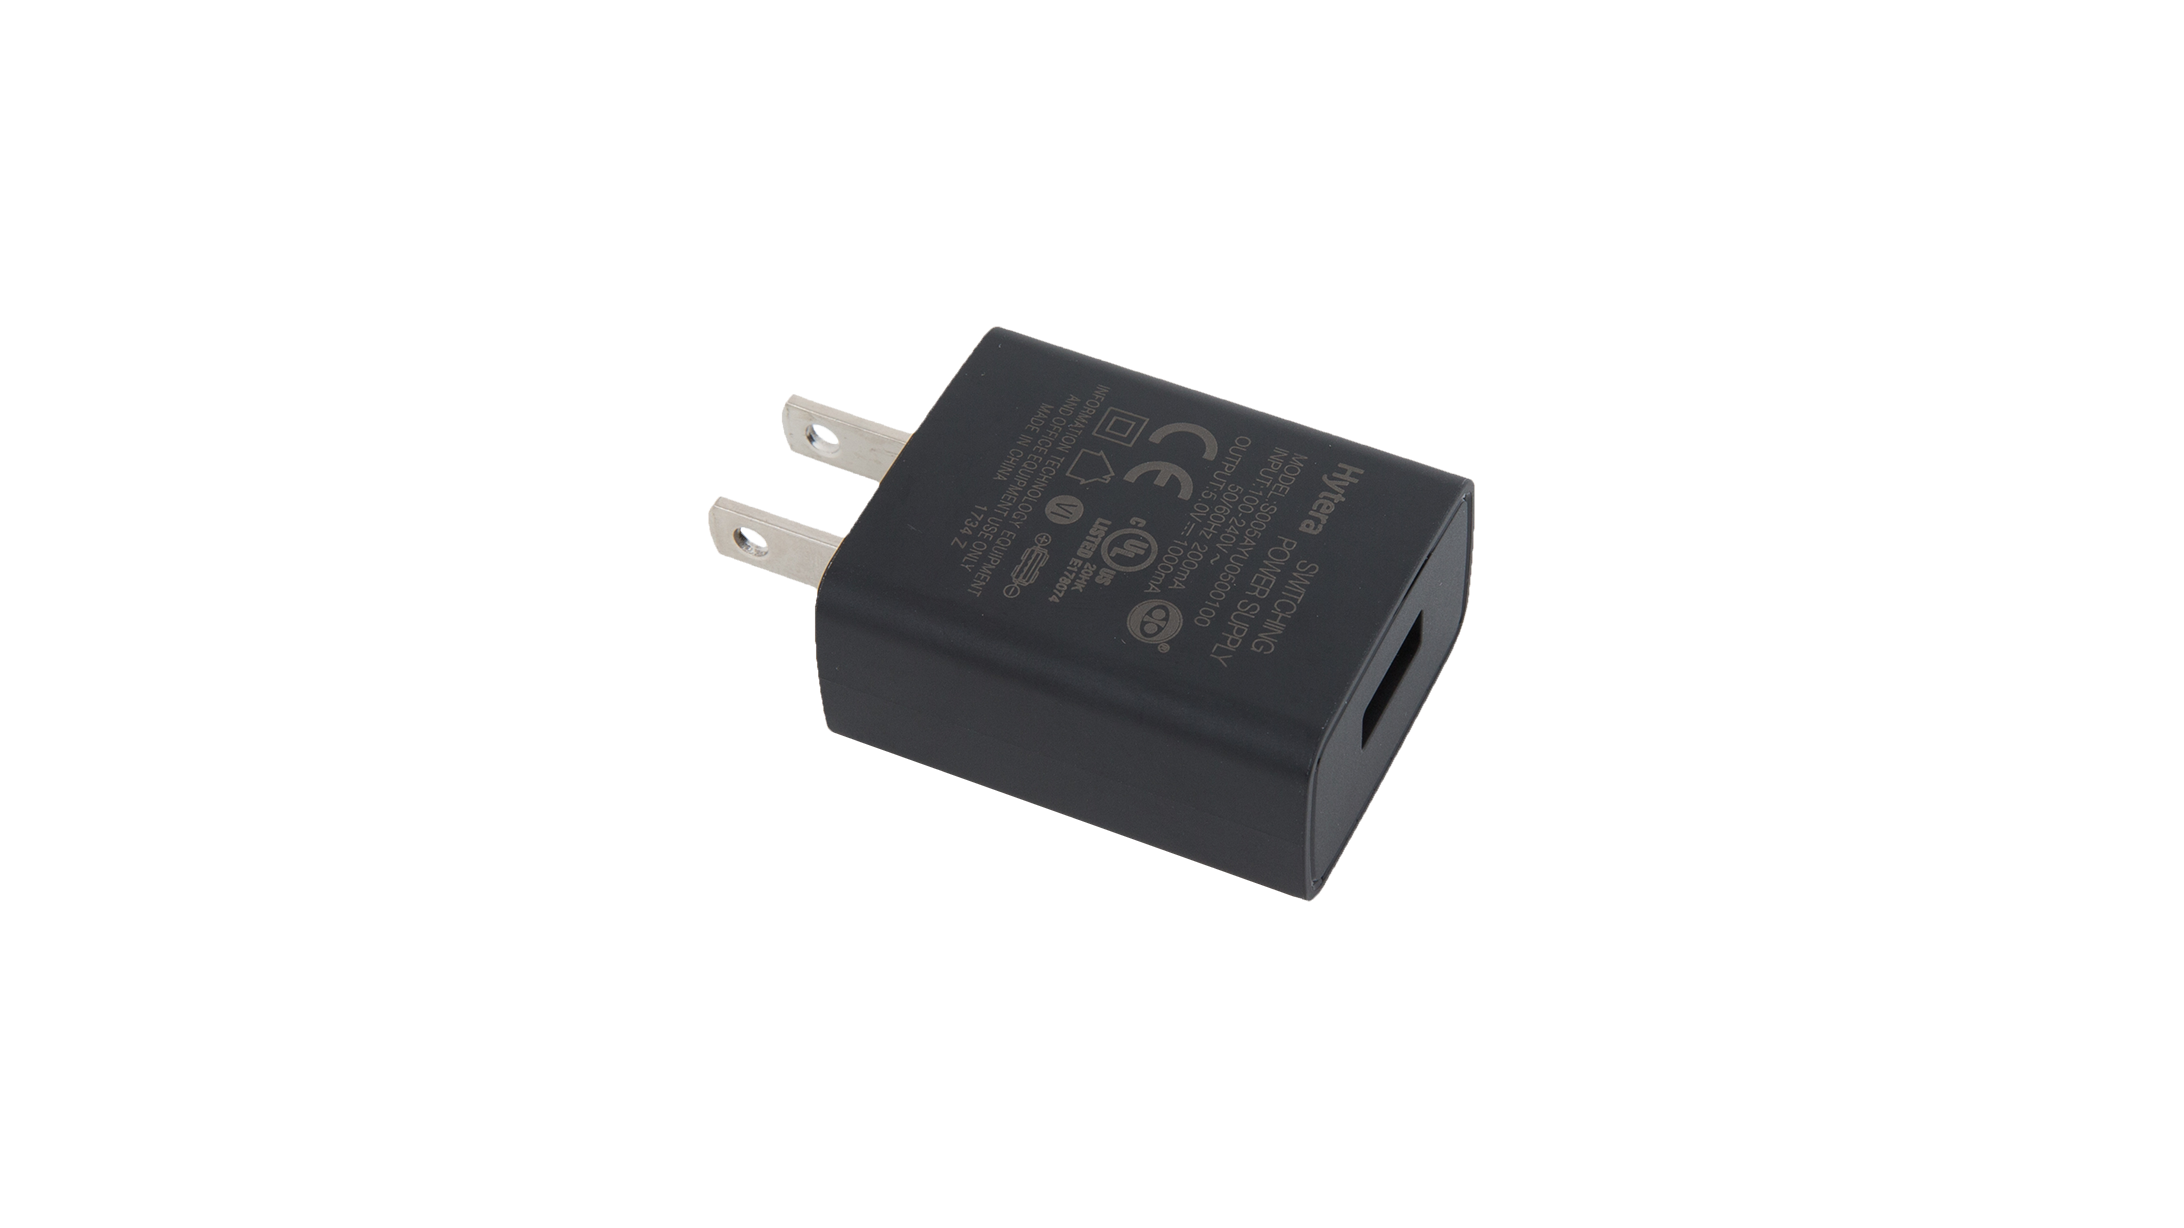 PS2023 Power Adapter (US)